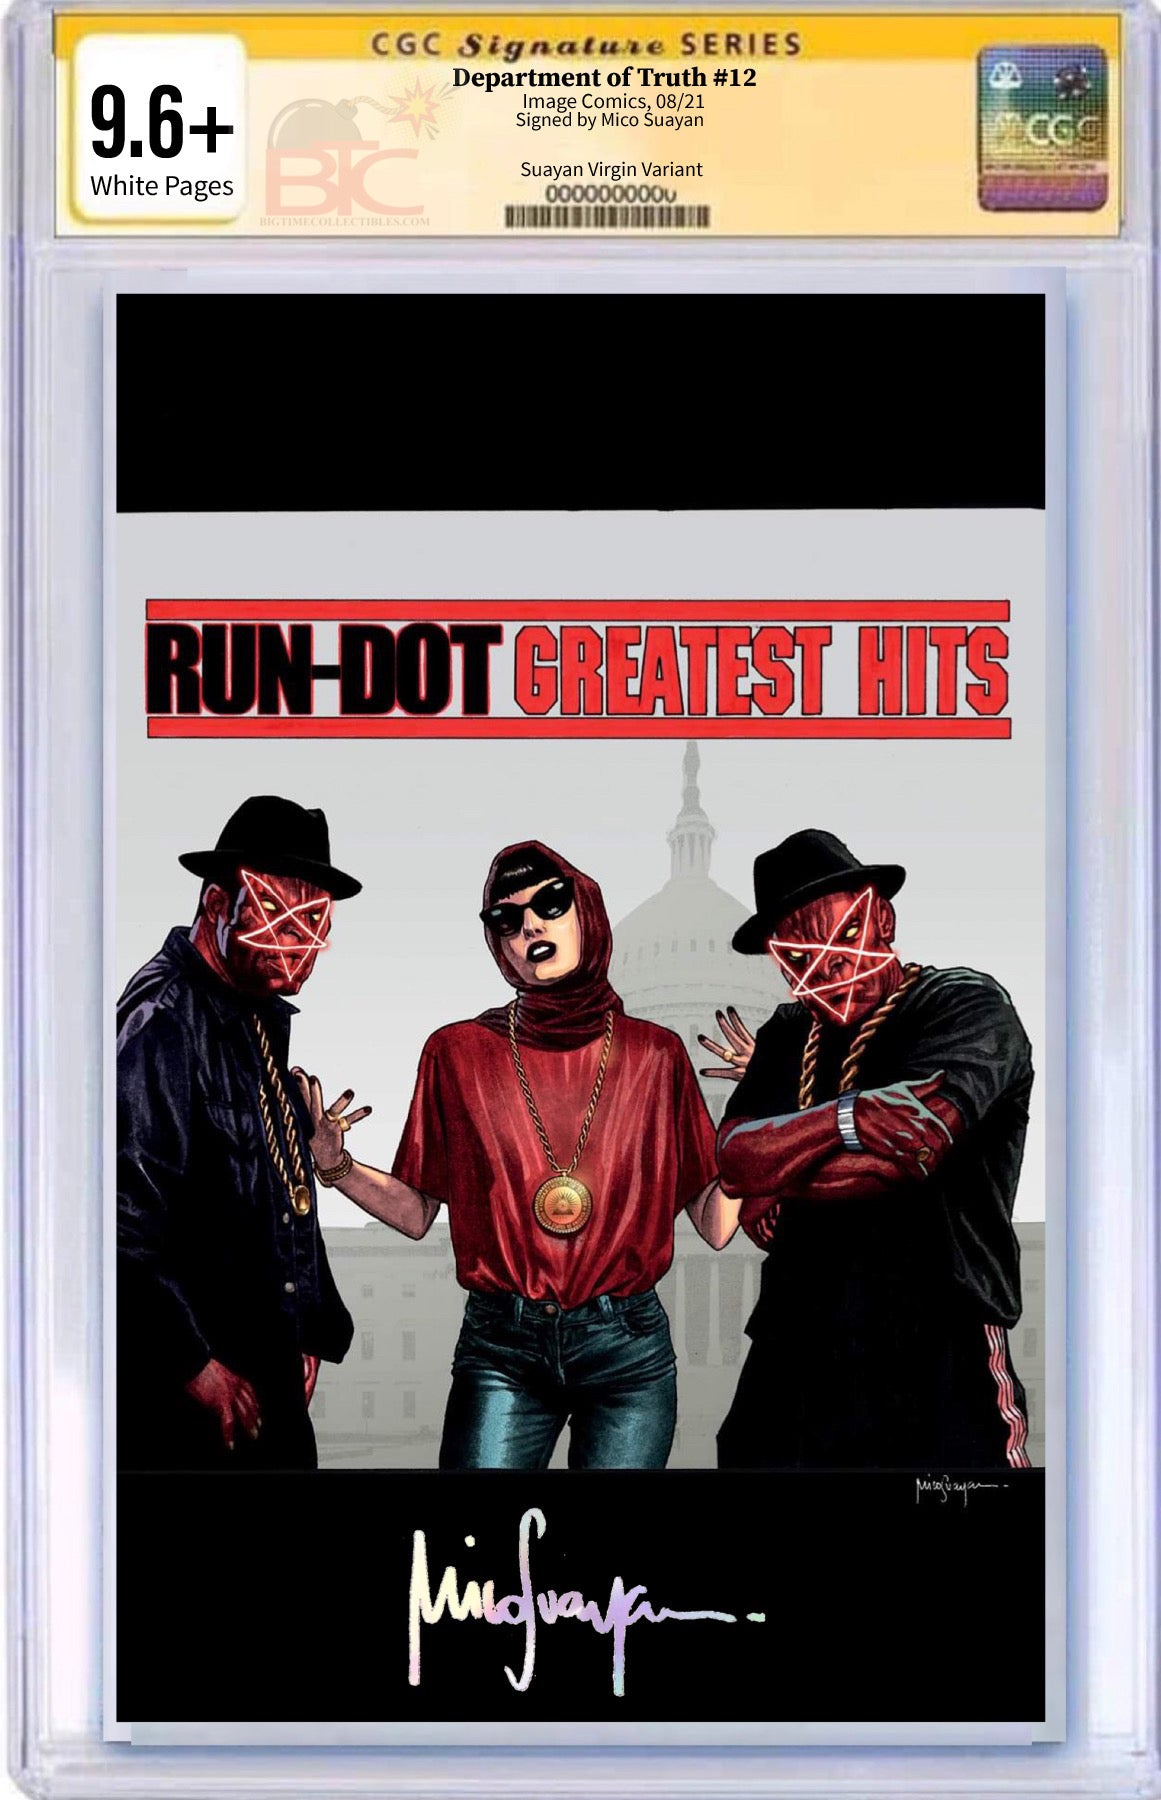 08/25/2021 DEPARTMENT OF TRUTH #12 MICO SUAYAN "RUN-DOT" EXCLUSIVE VARIANT